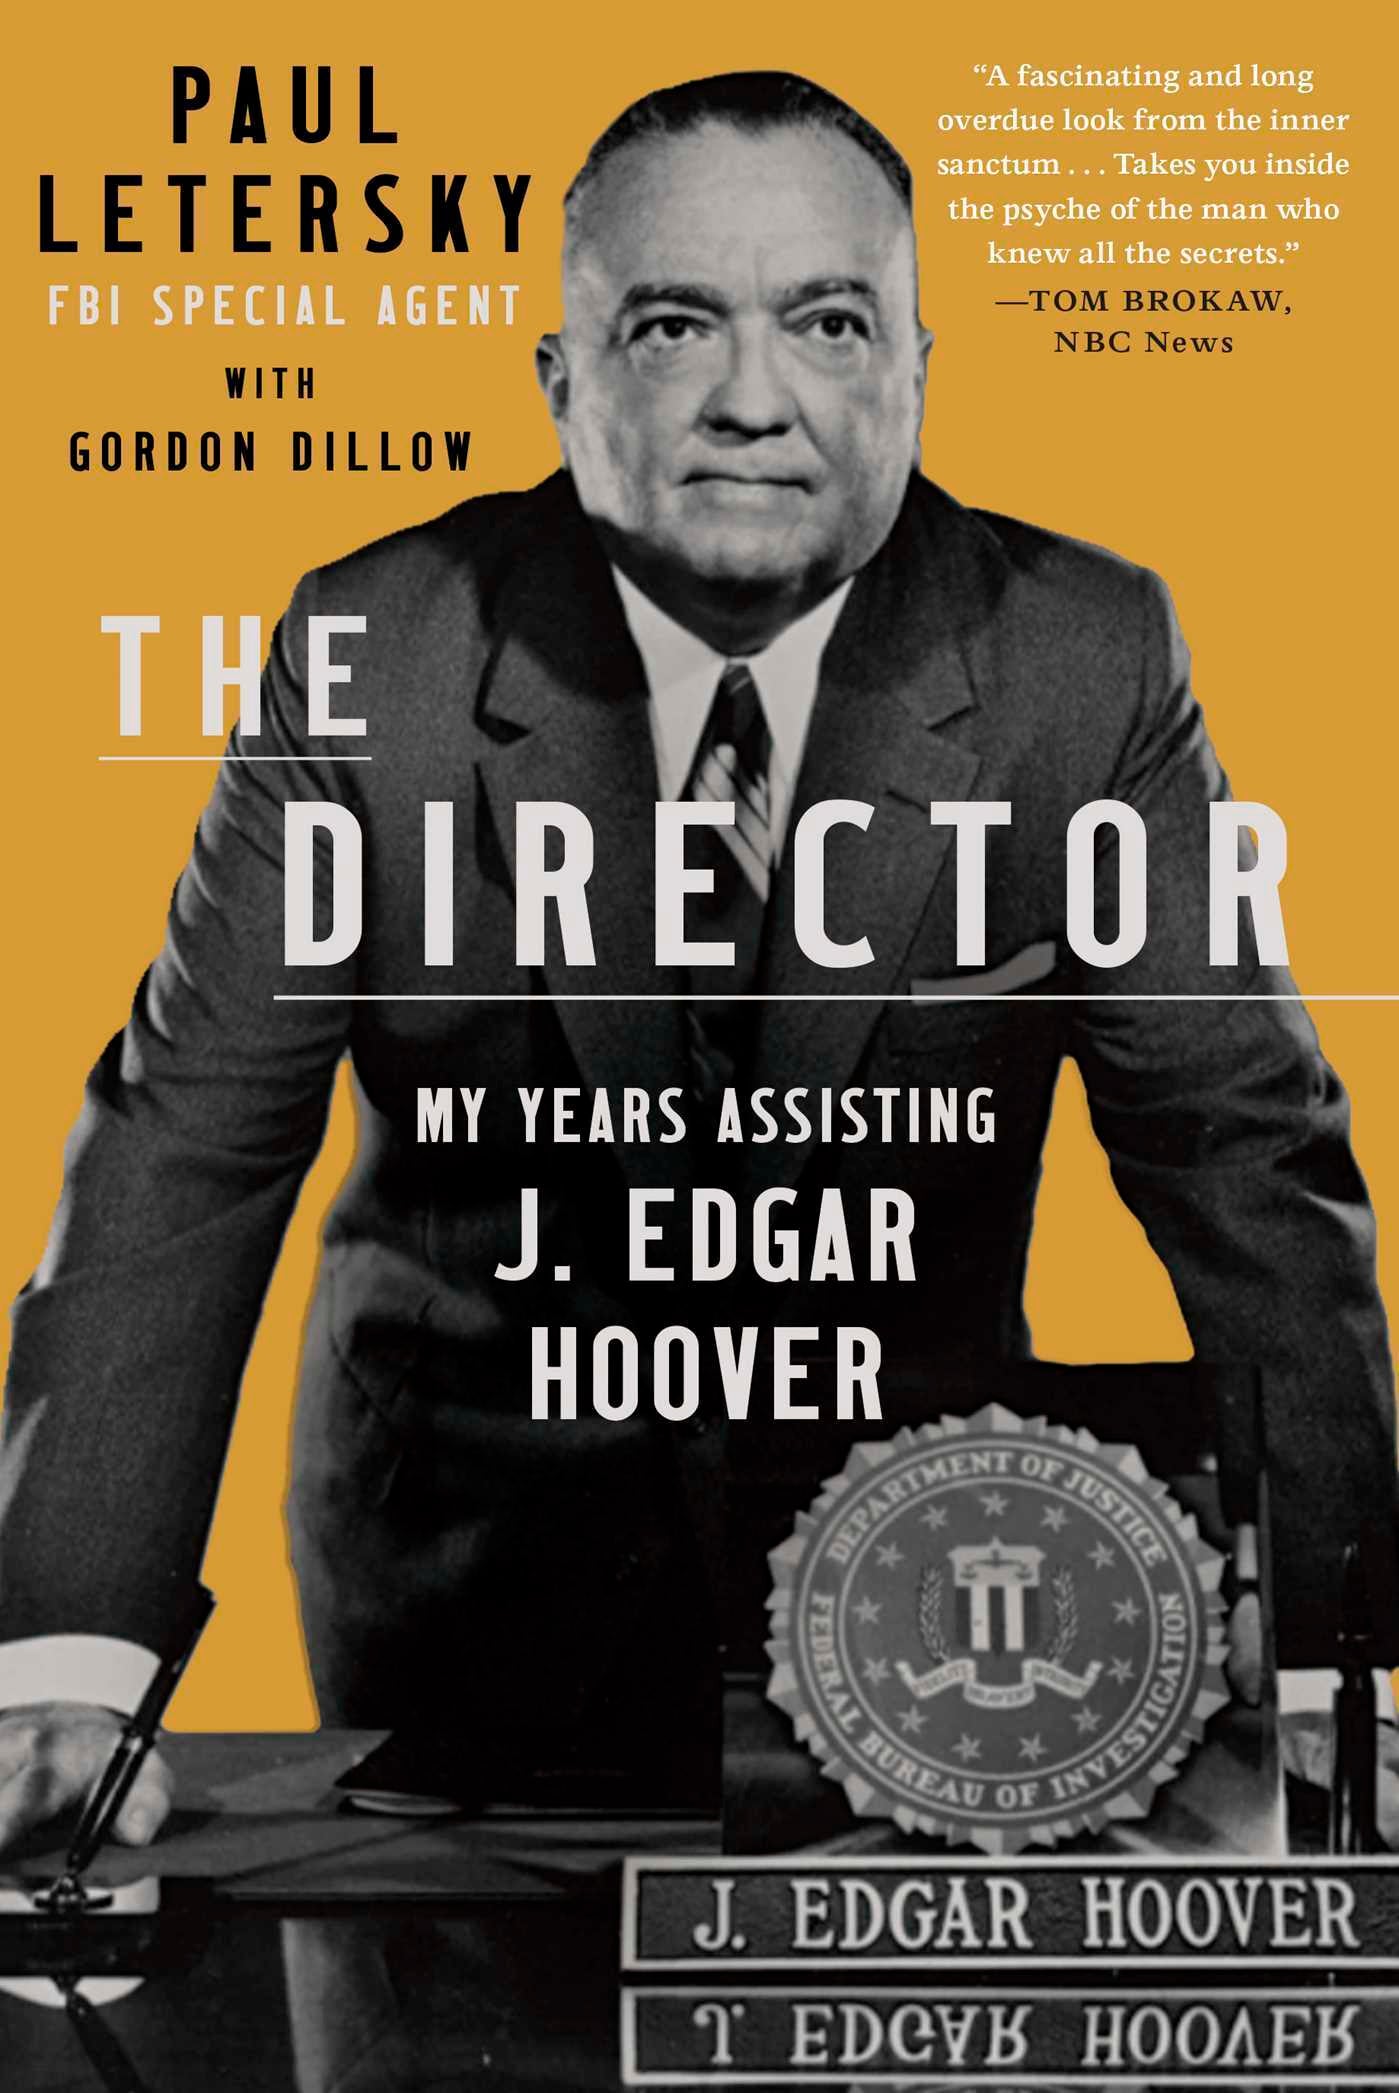 Book Review - The Director